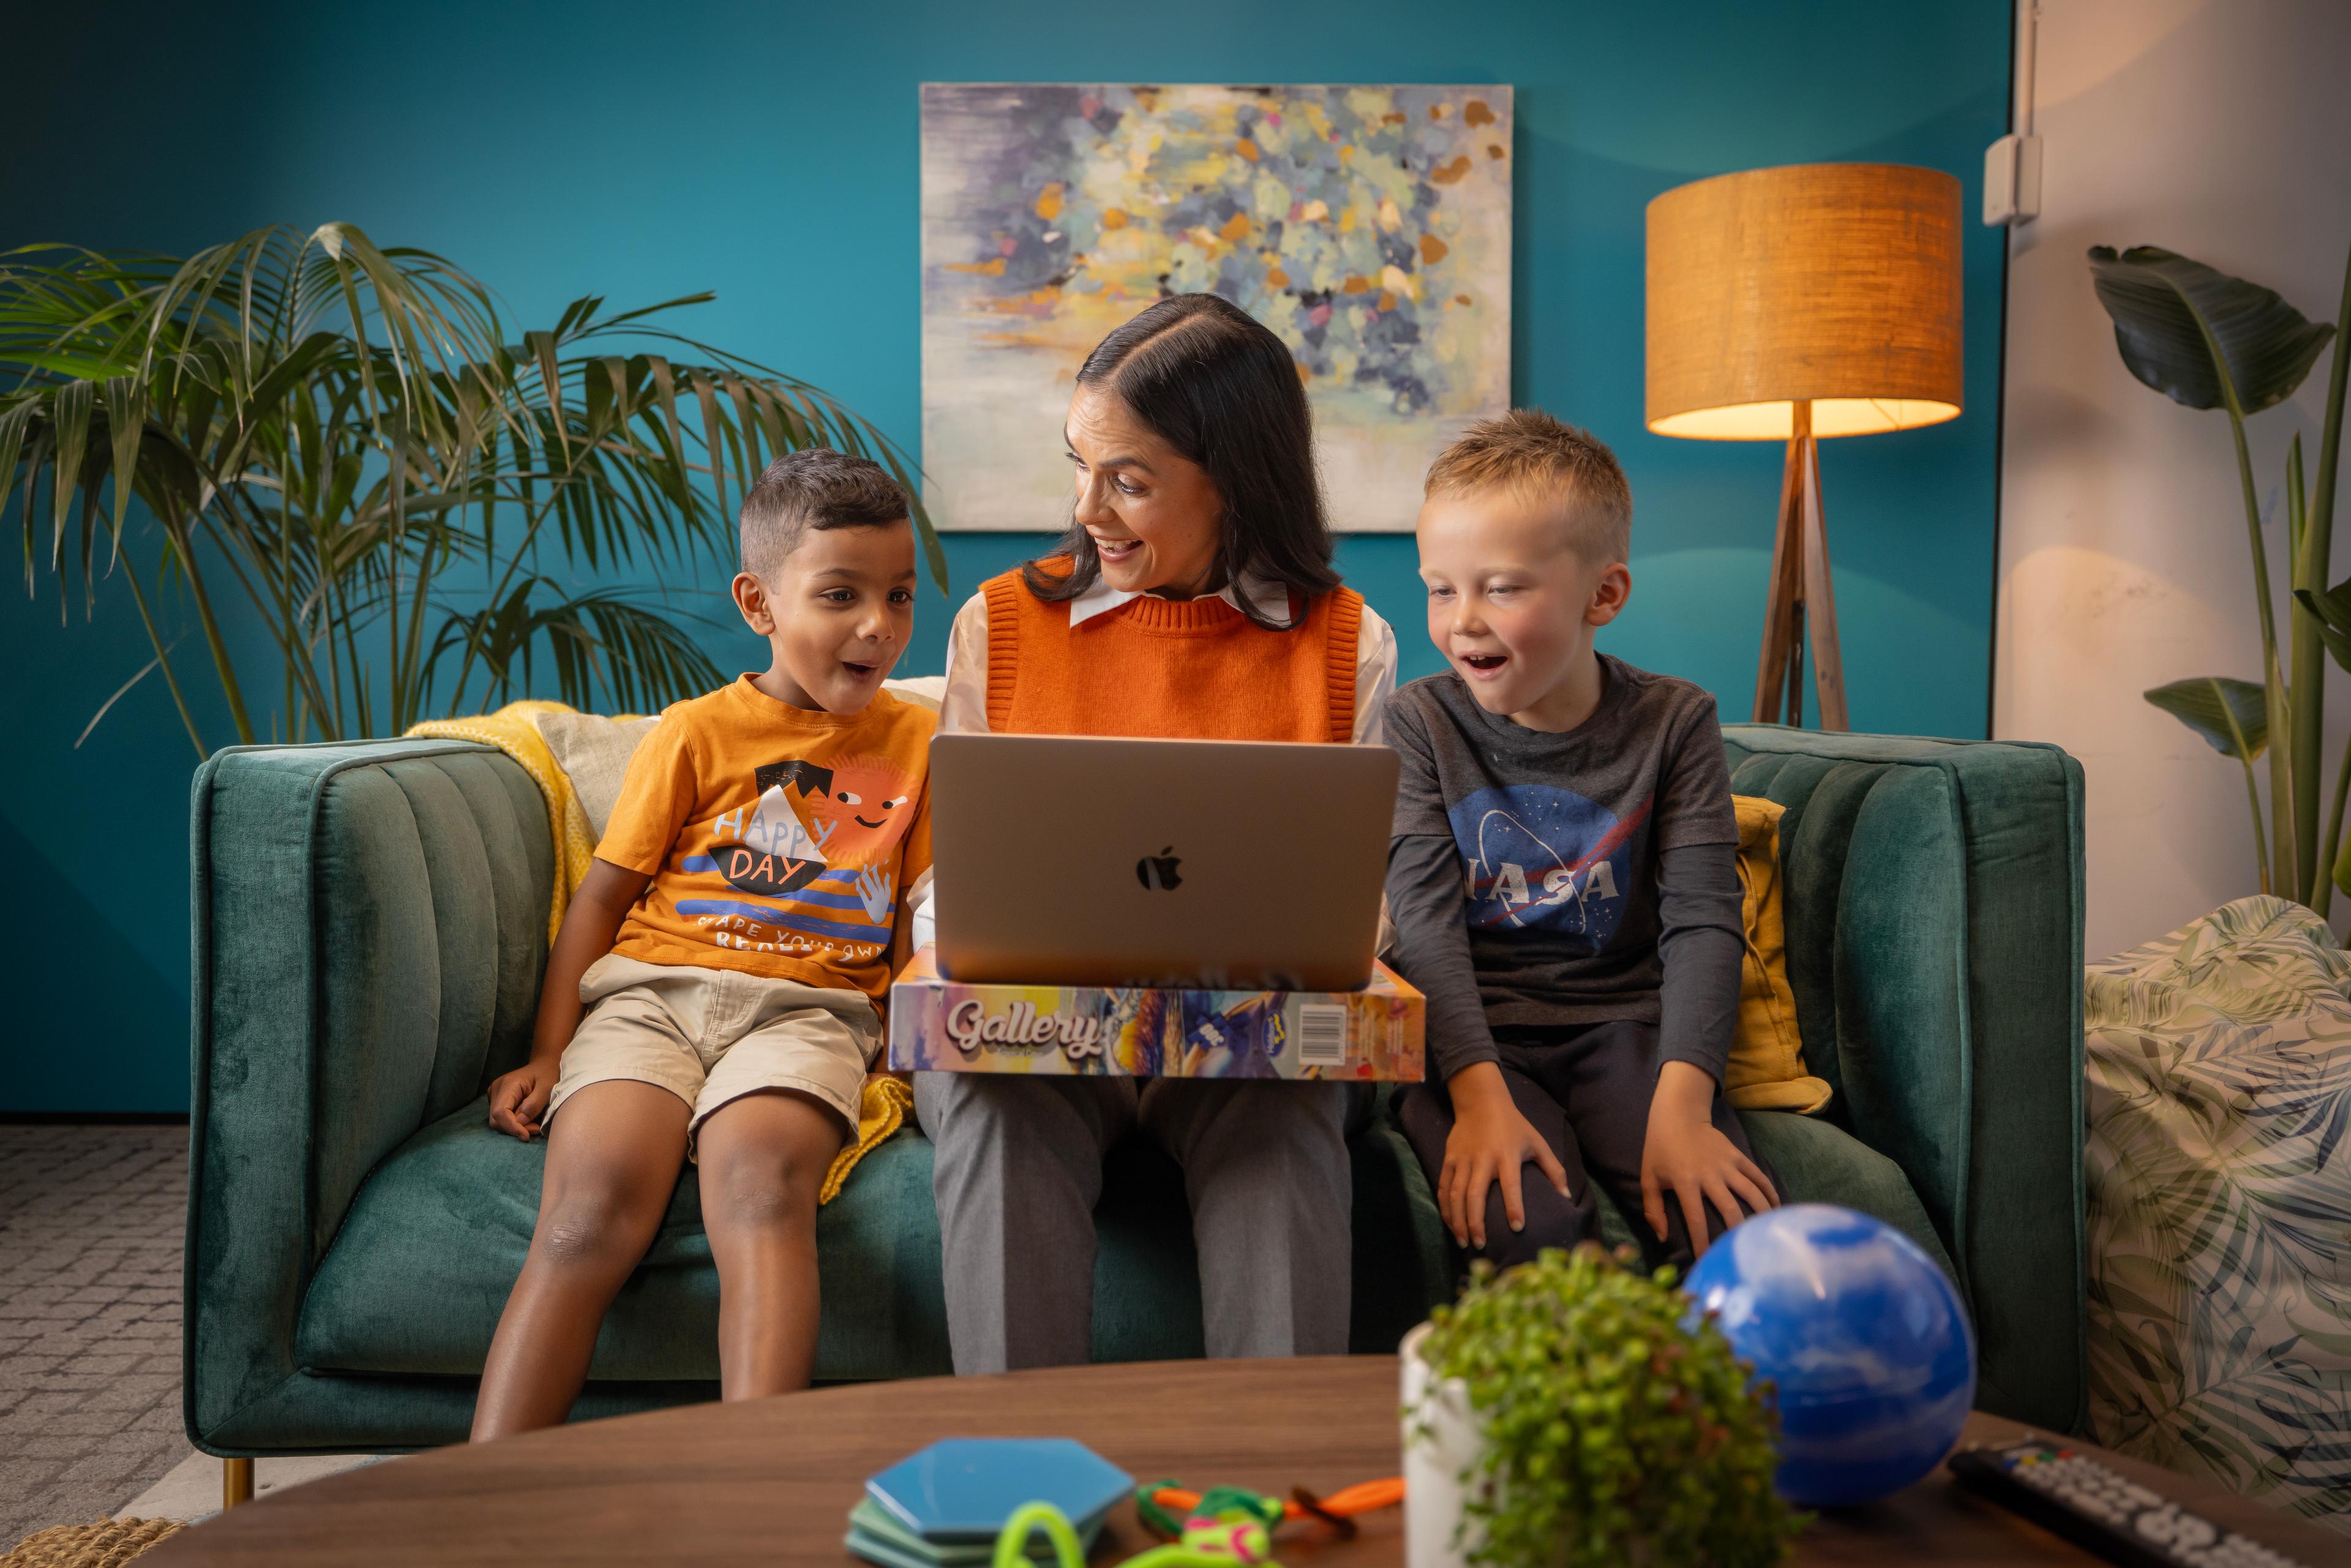 A woman and two boys smile while looking at a laptop on a teal sofa, surrounded by educational toys.